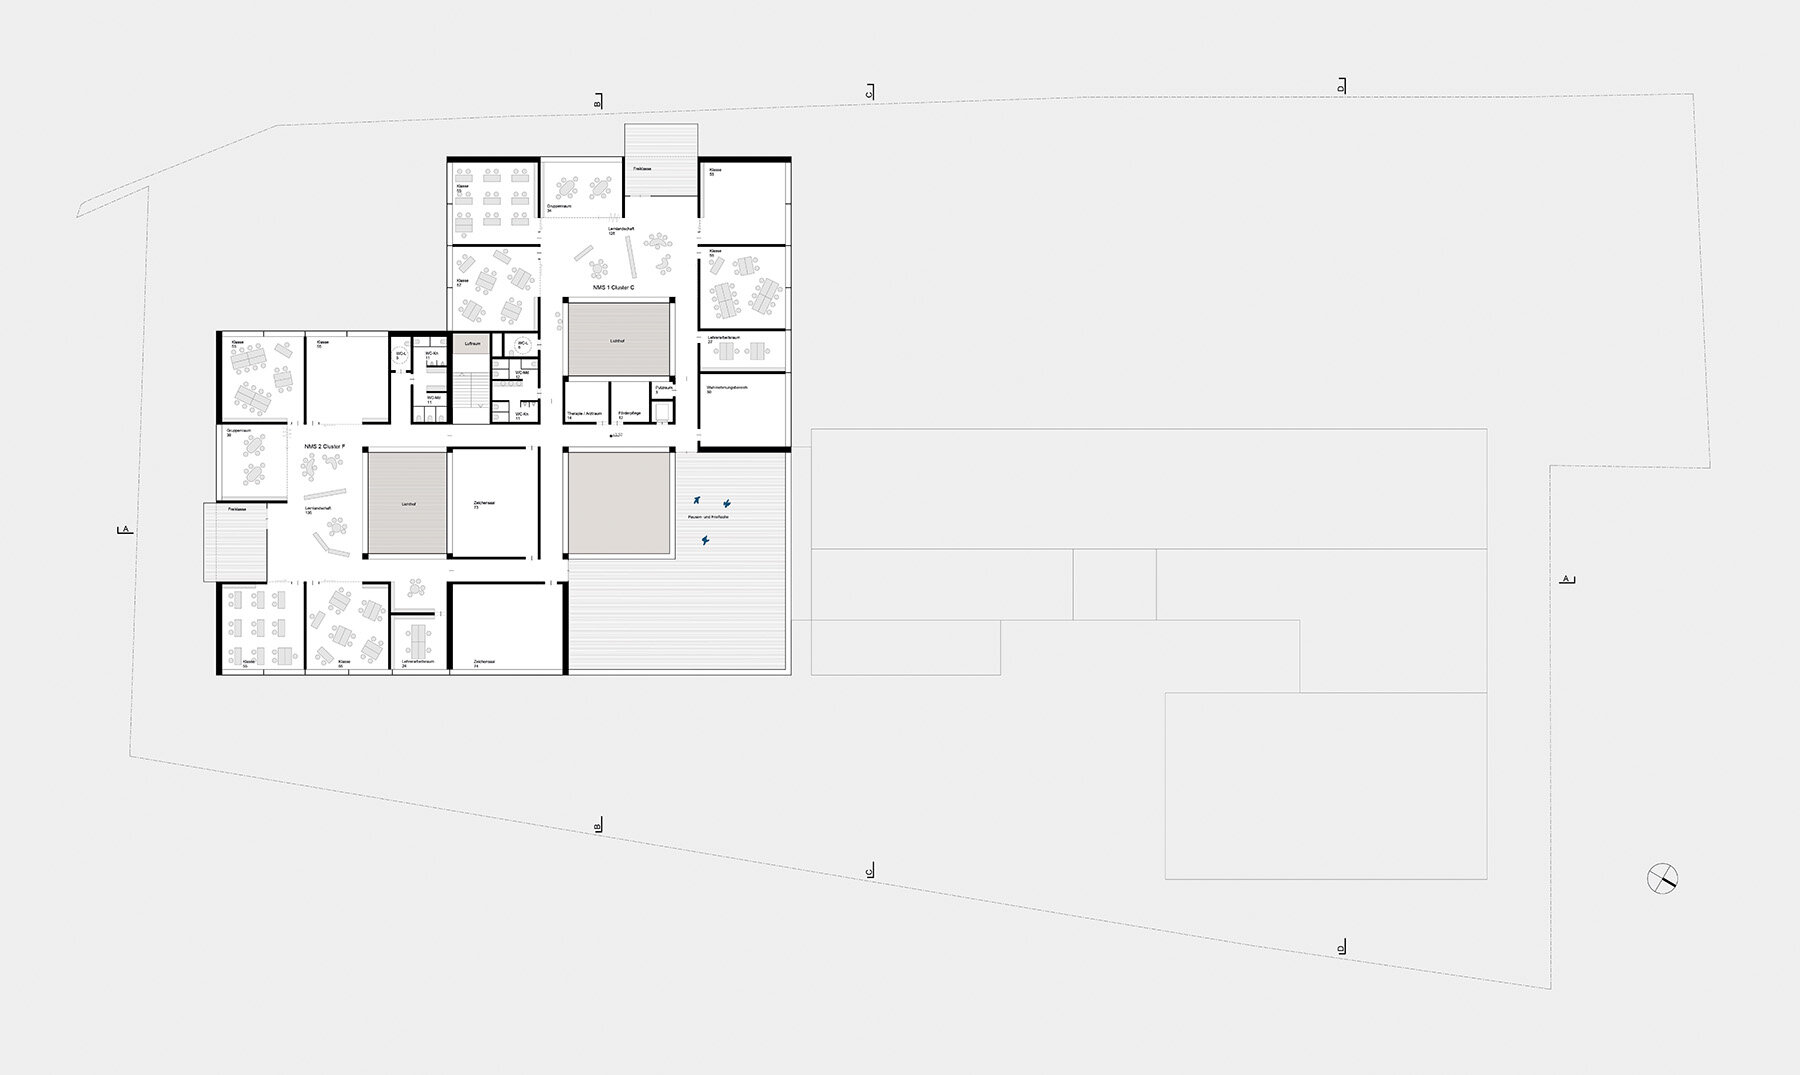 Level 2 Plan. Each Cluster is organized around a learning landscape adjacent to an inner courtyard.